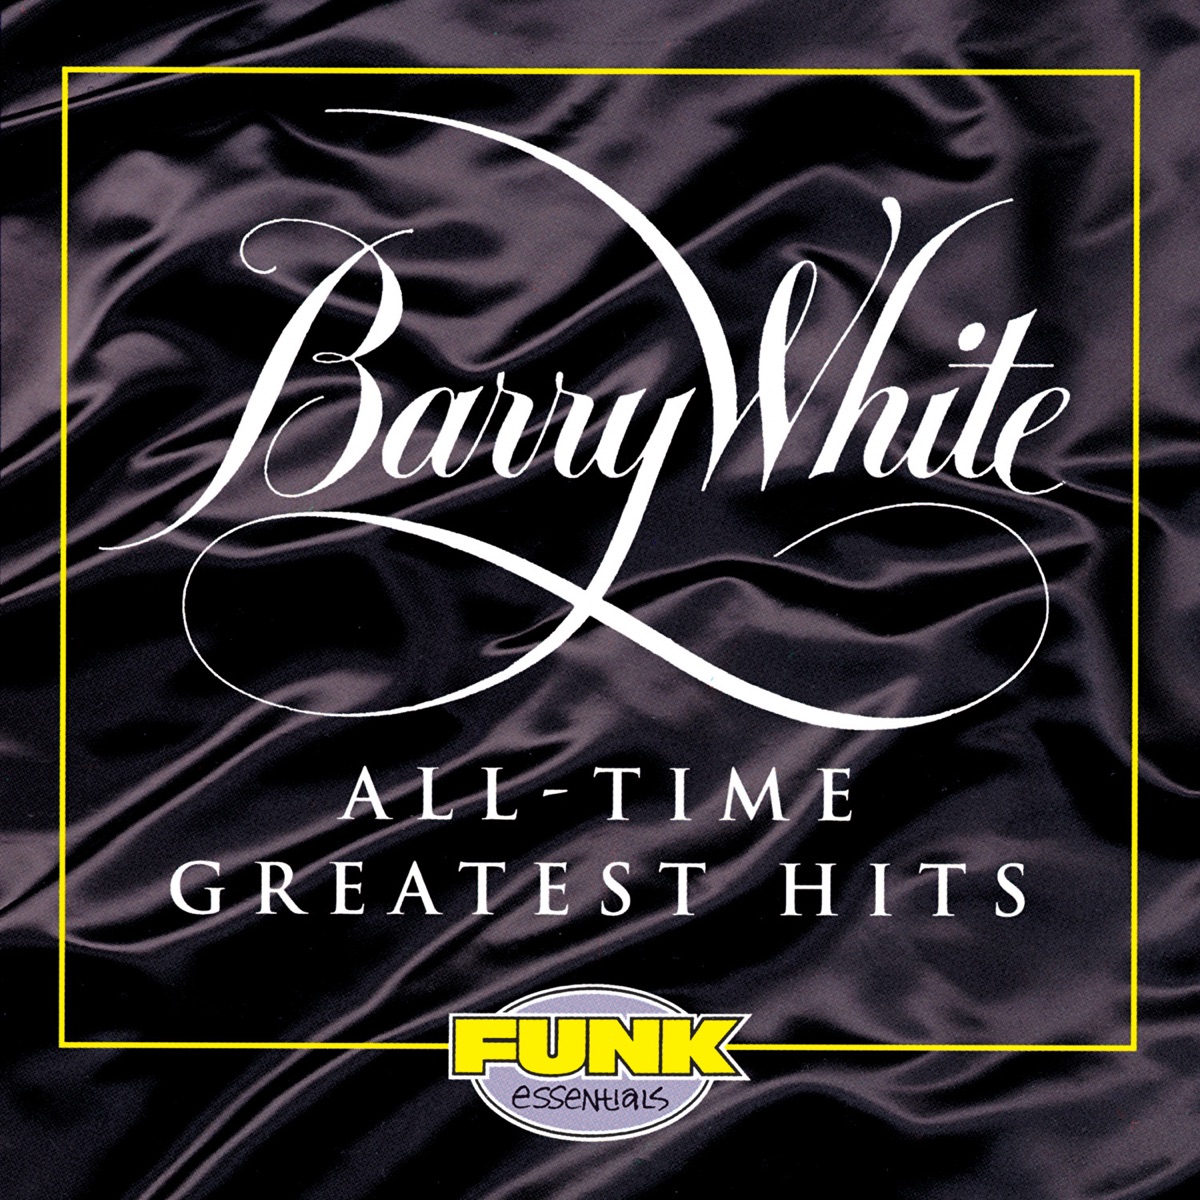 Love Songs by Barry White on Apple Music